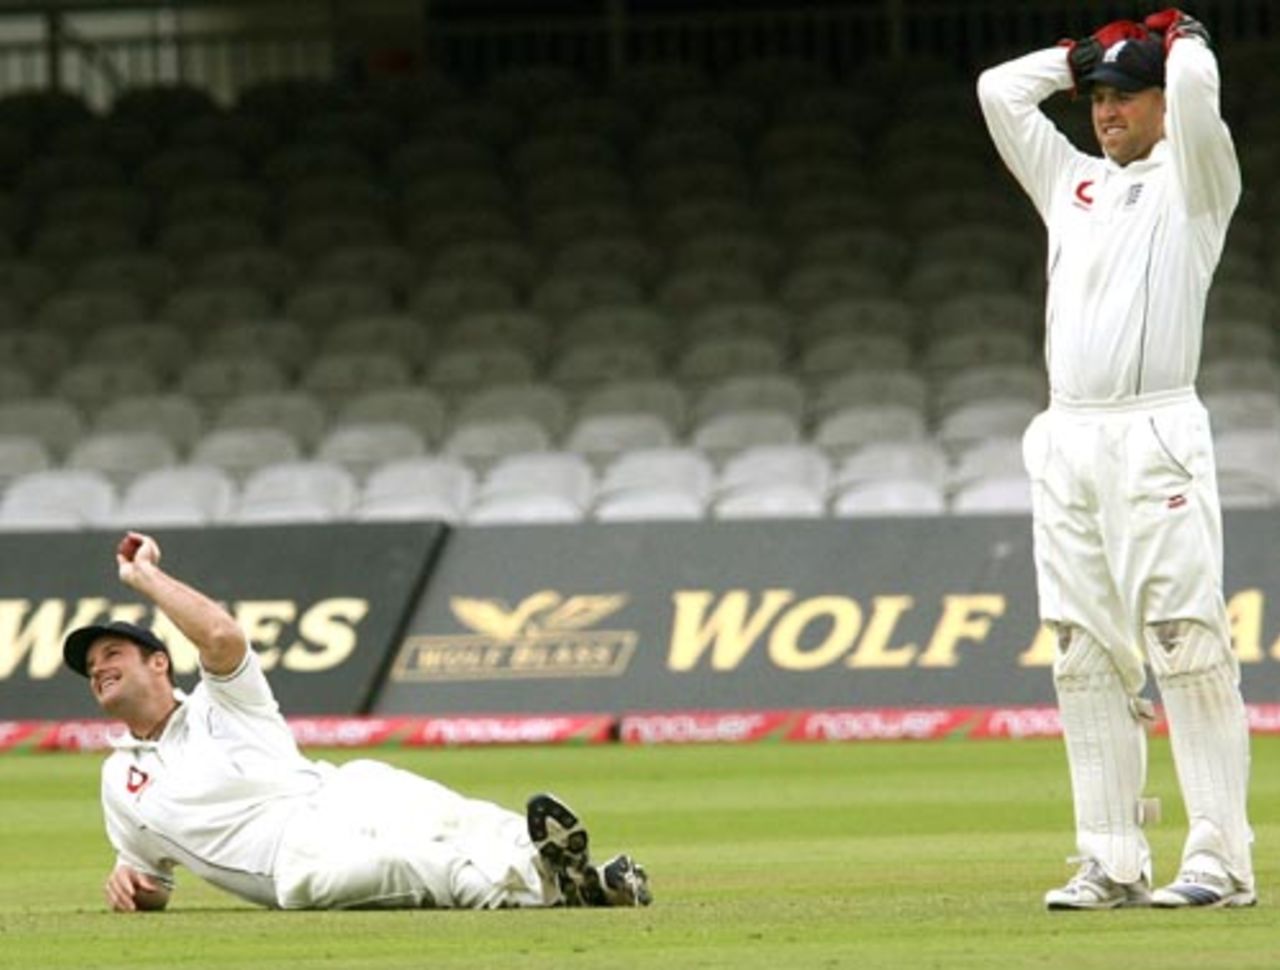 Andrew Strauss lies on the ground as Matt Prior rues a missed opportunity, England v India, 1st Test, Lord's, 5th day, July 23, 2007 